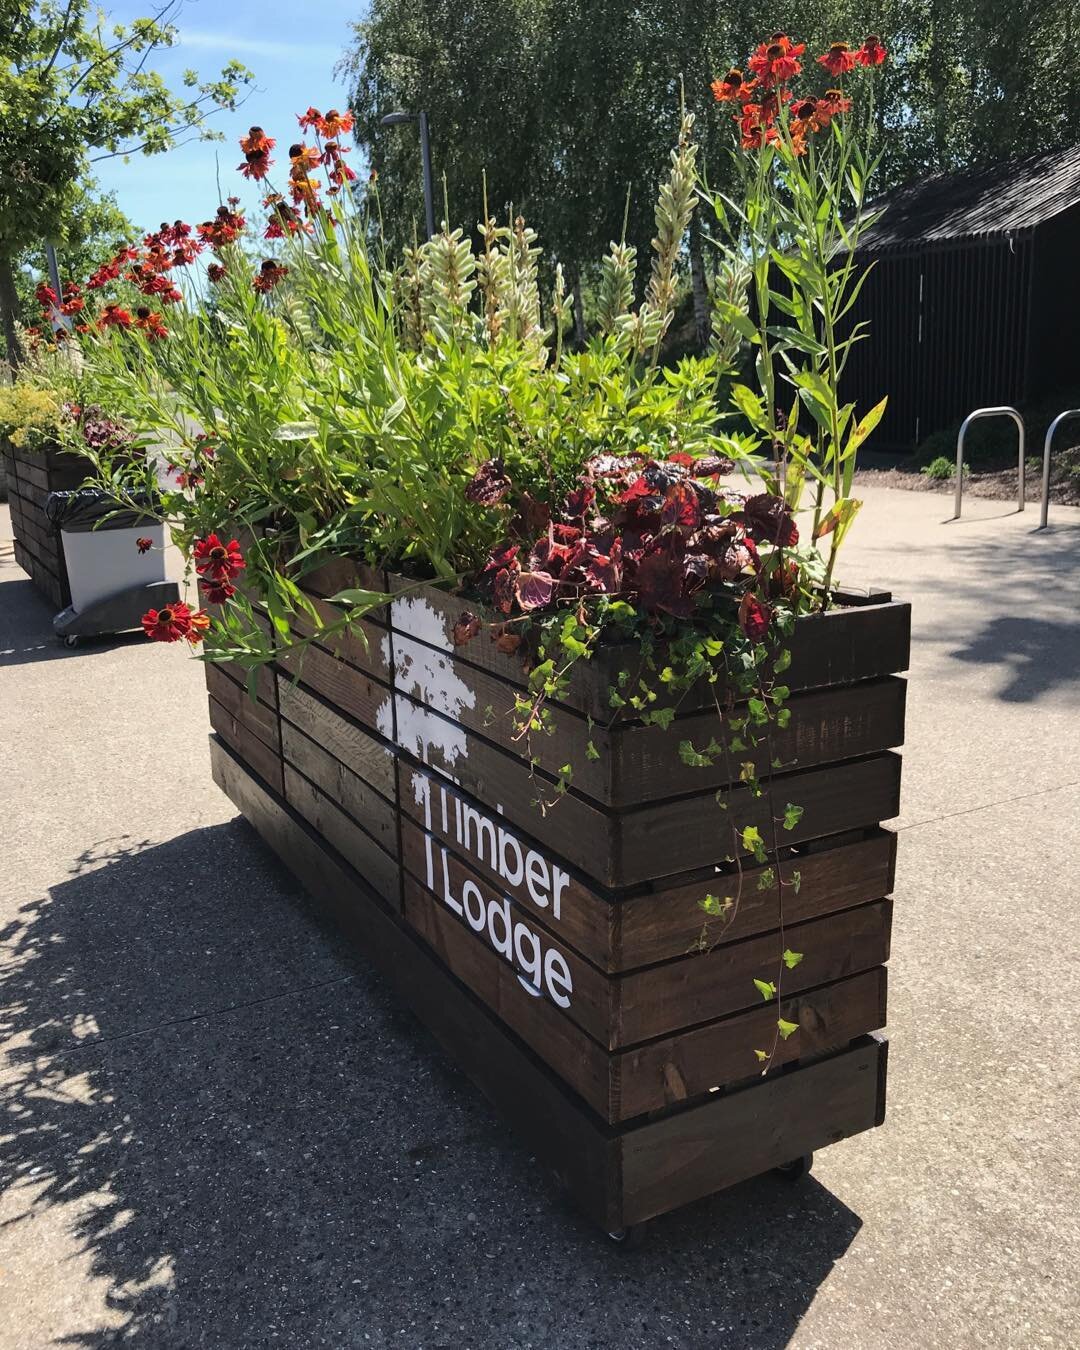 Already thinking of the summer just gone and the crate style mobile planters we made for #timberlodgecafe #qeop